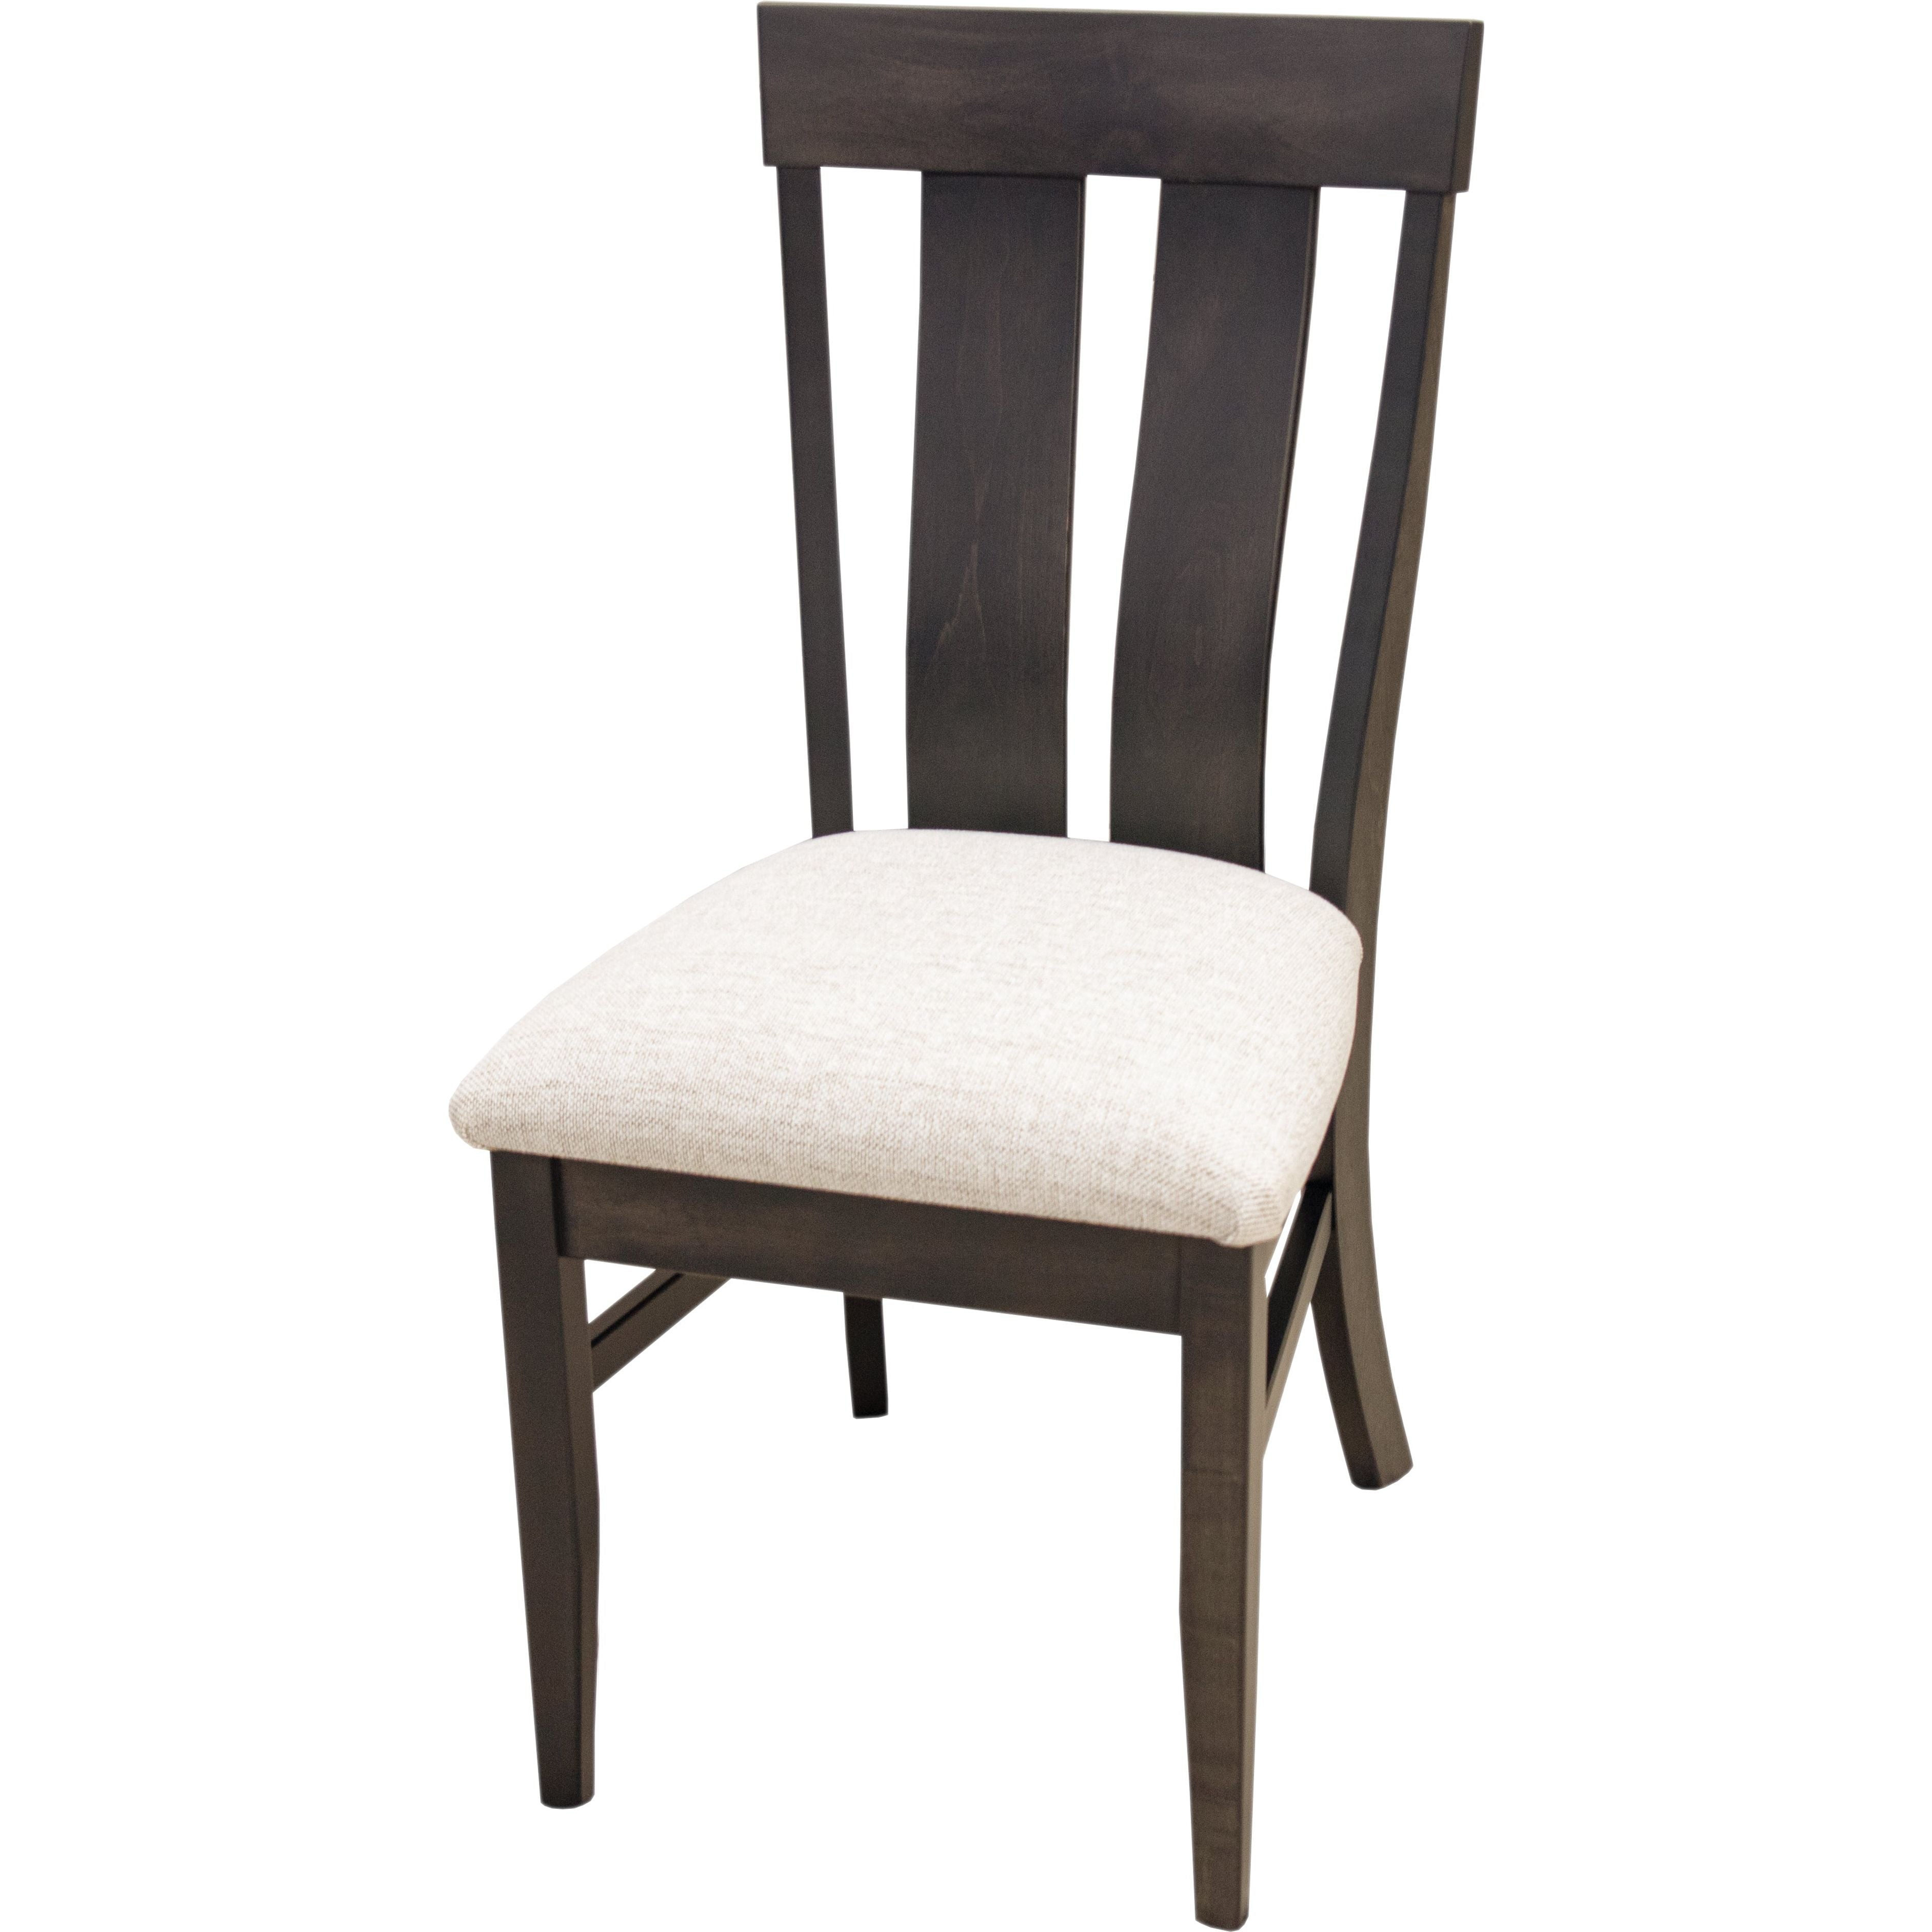 Kinglet Side Dining Chair with Faux Leather Seat